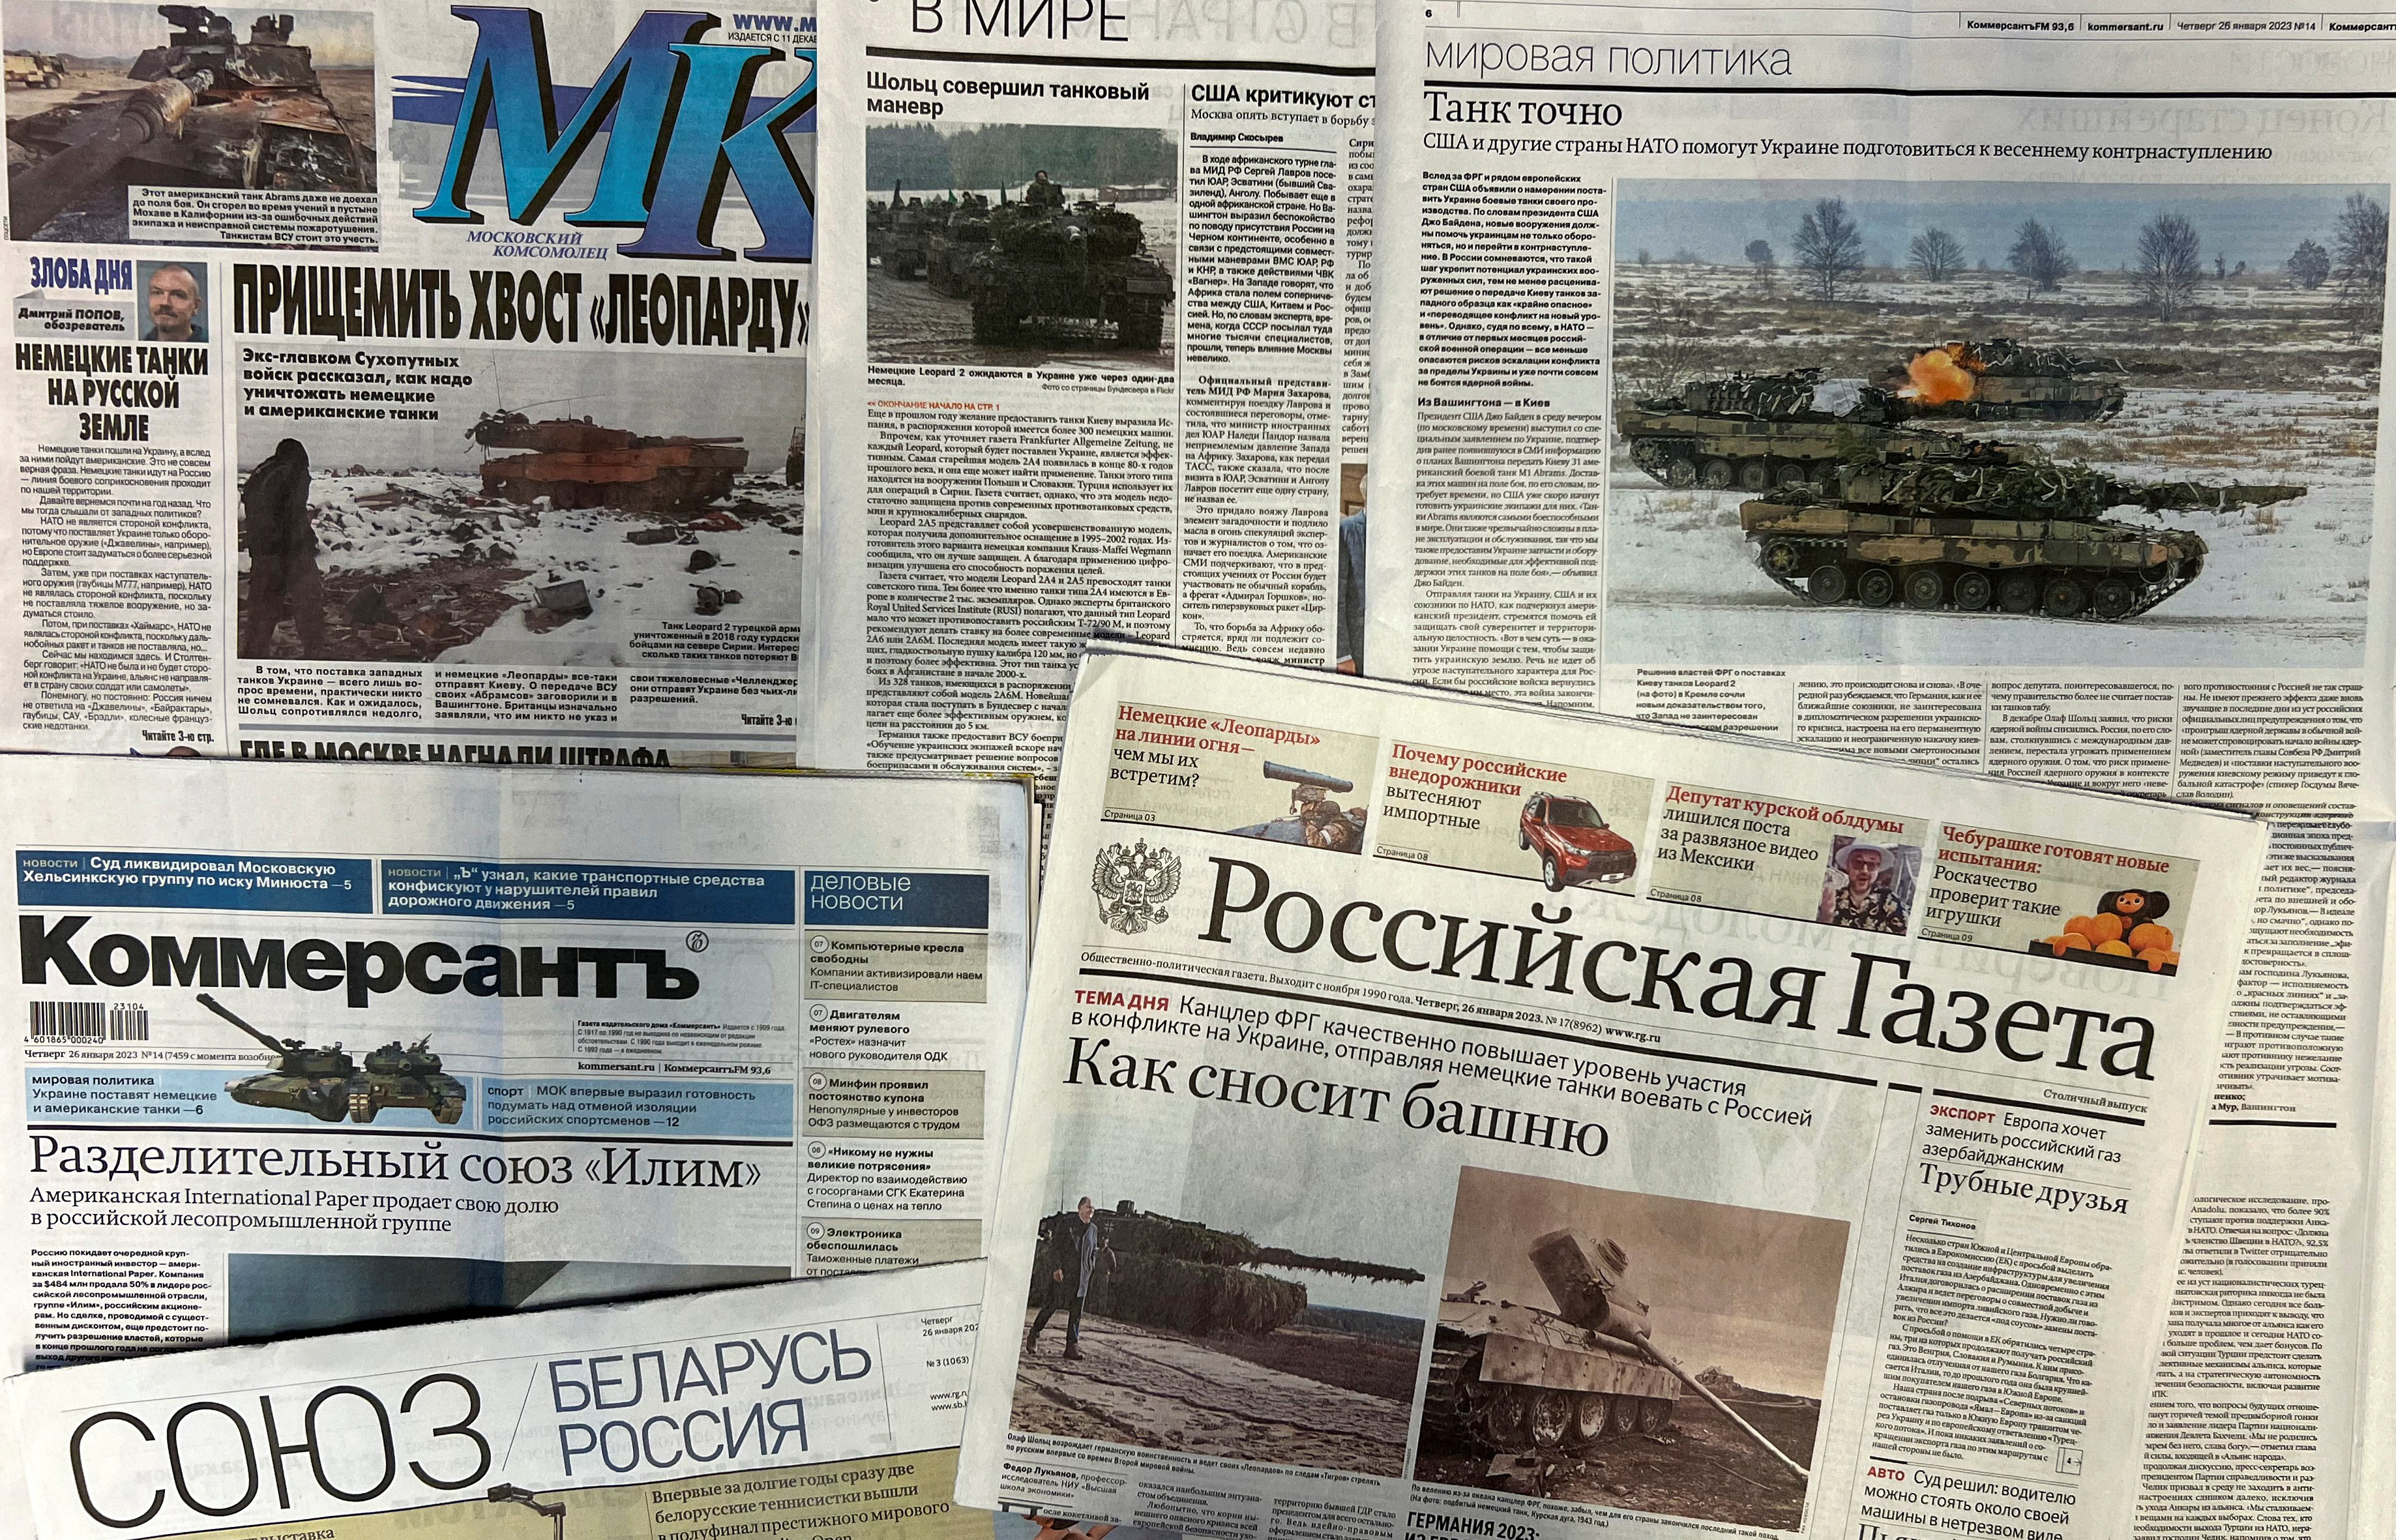 Illustration shows Russian daily newspapers